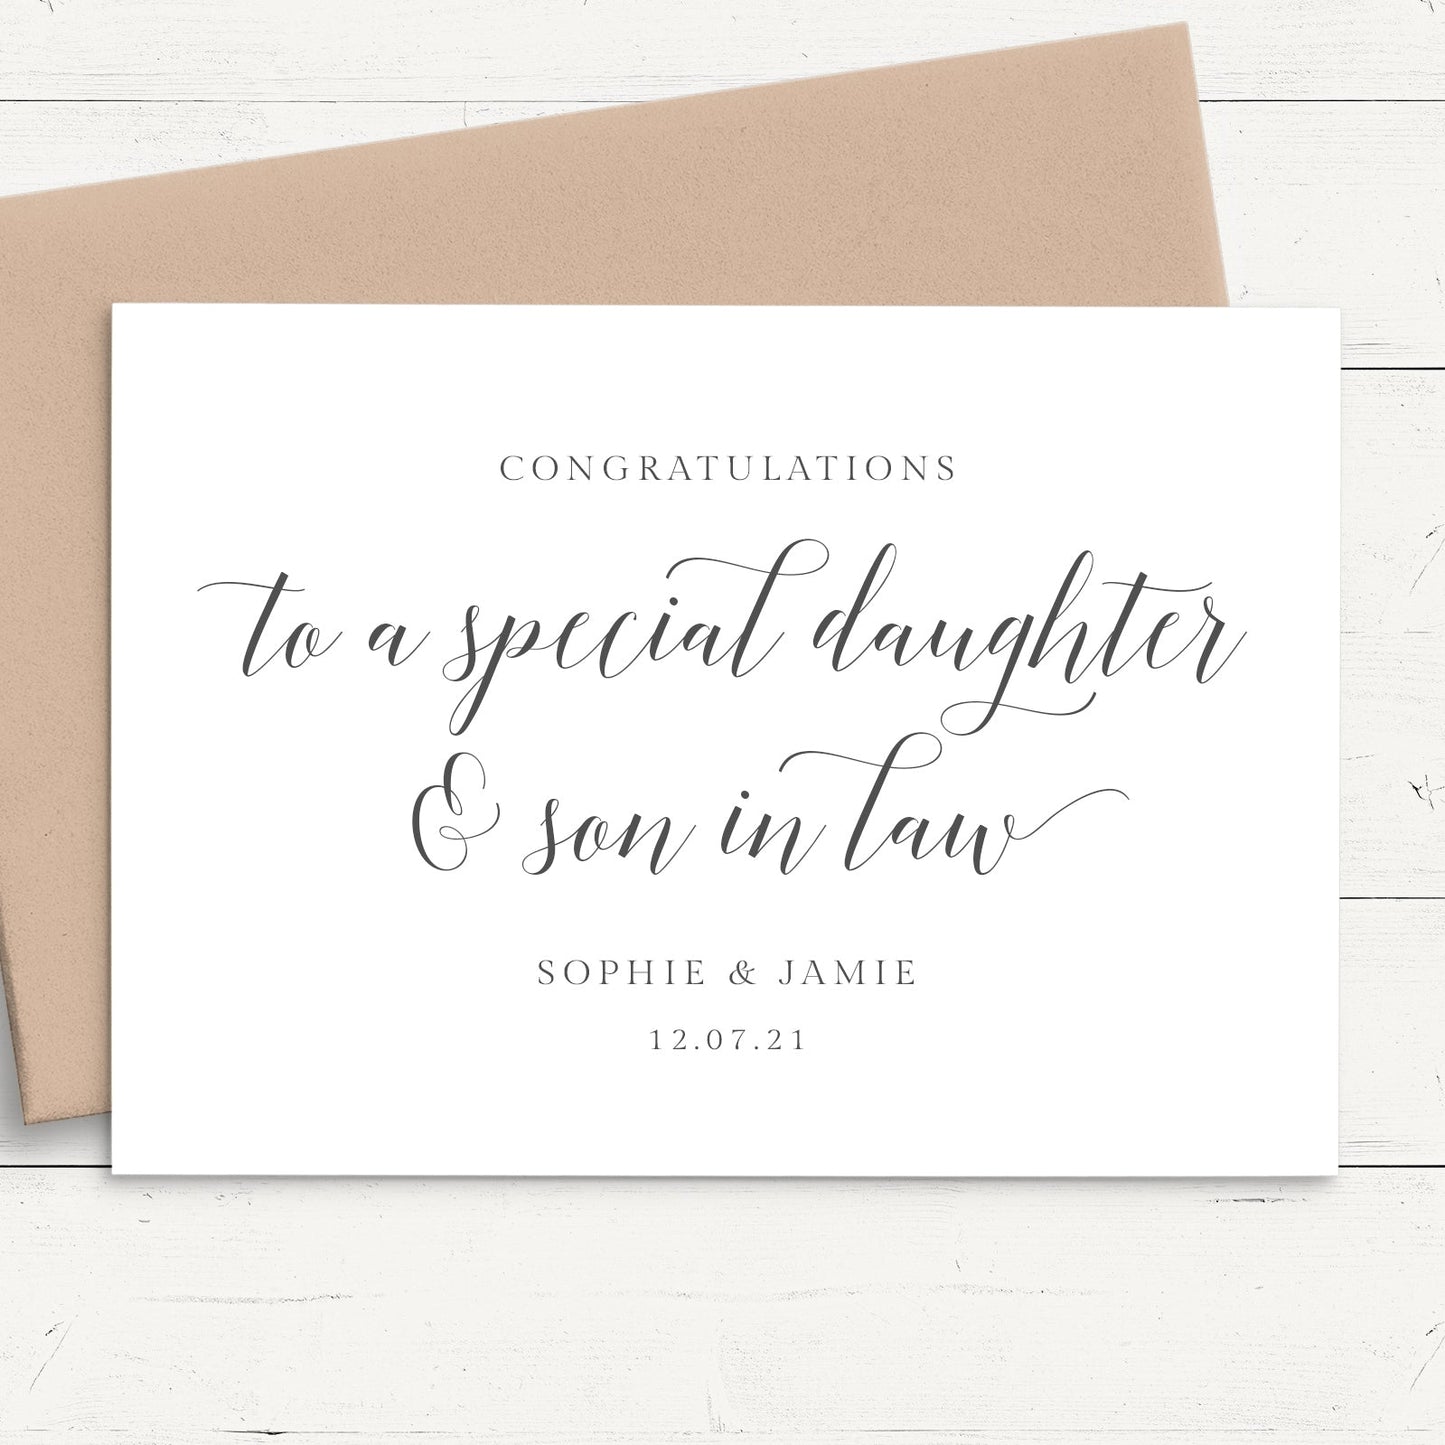 black and white modern script wedding card daughter and son in law personalised matte smooth white cardstock kraft brown envelope